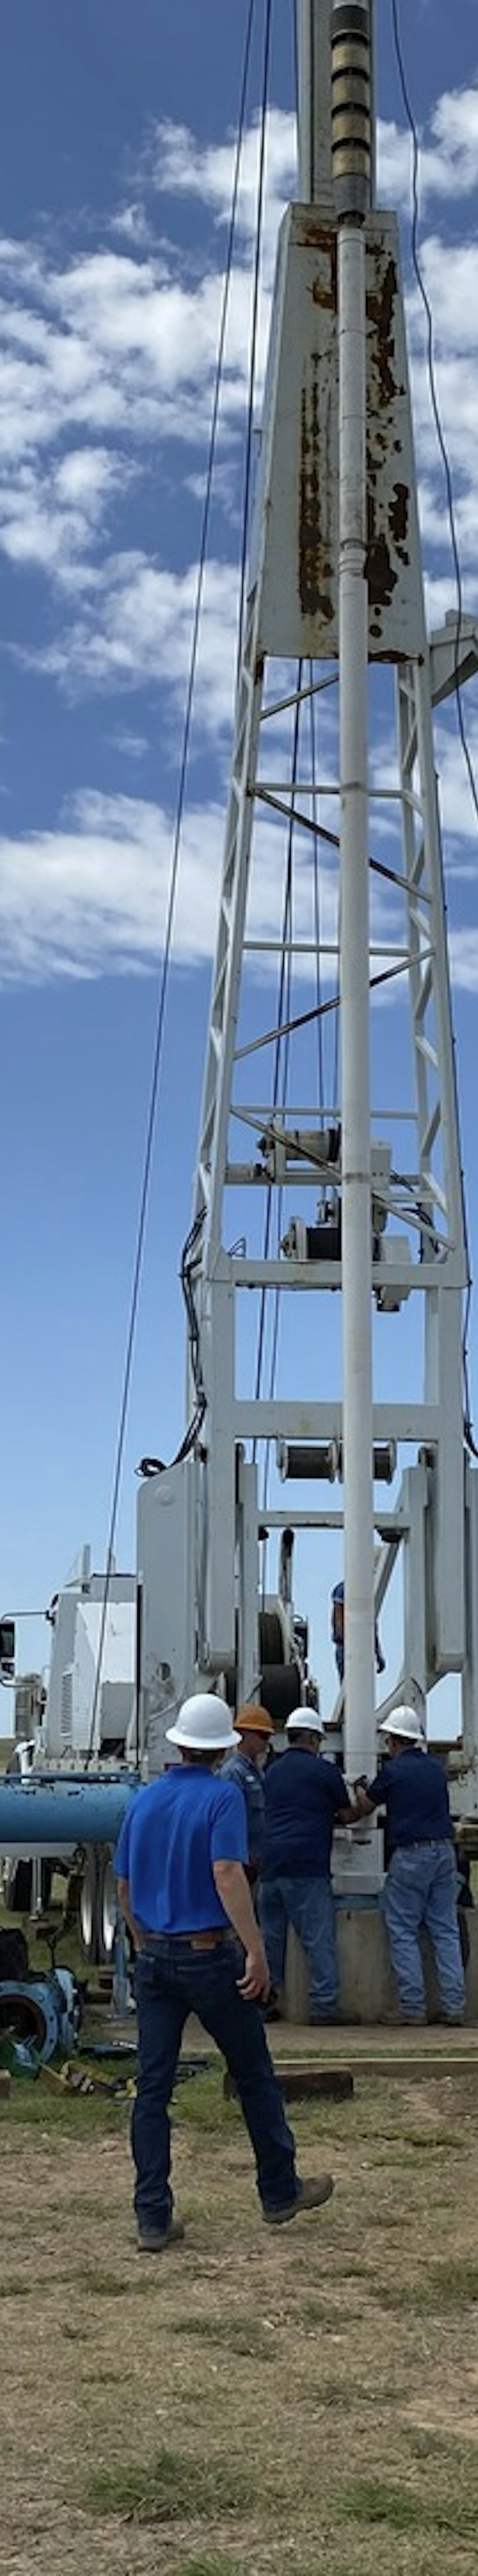                         CRMWA High Capacity Deep Well Beta Pumping Unit Replacements
                    